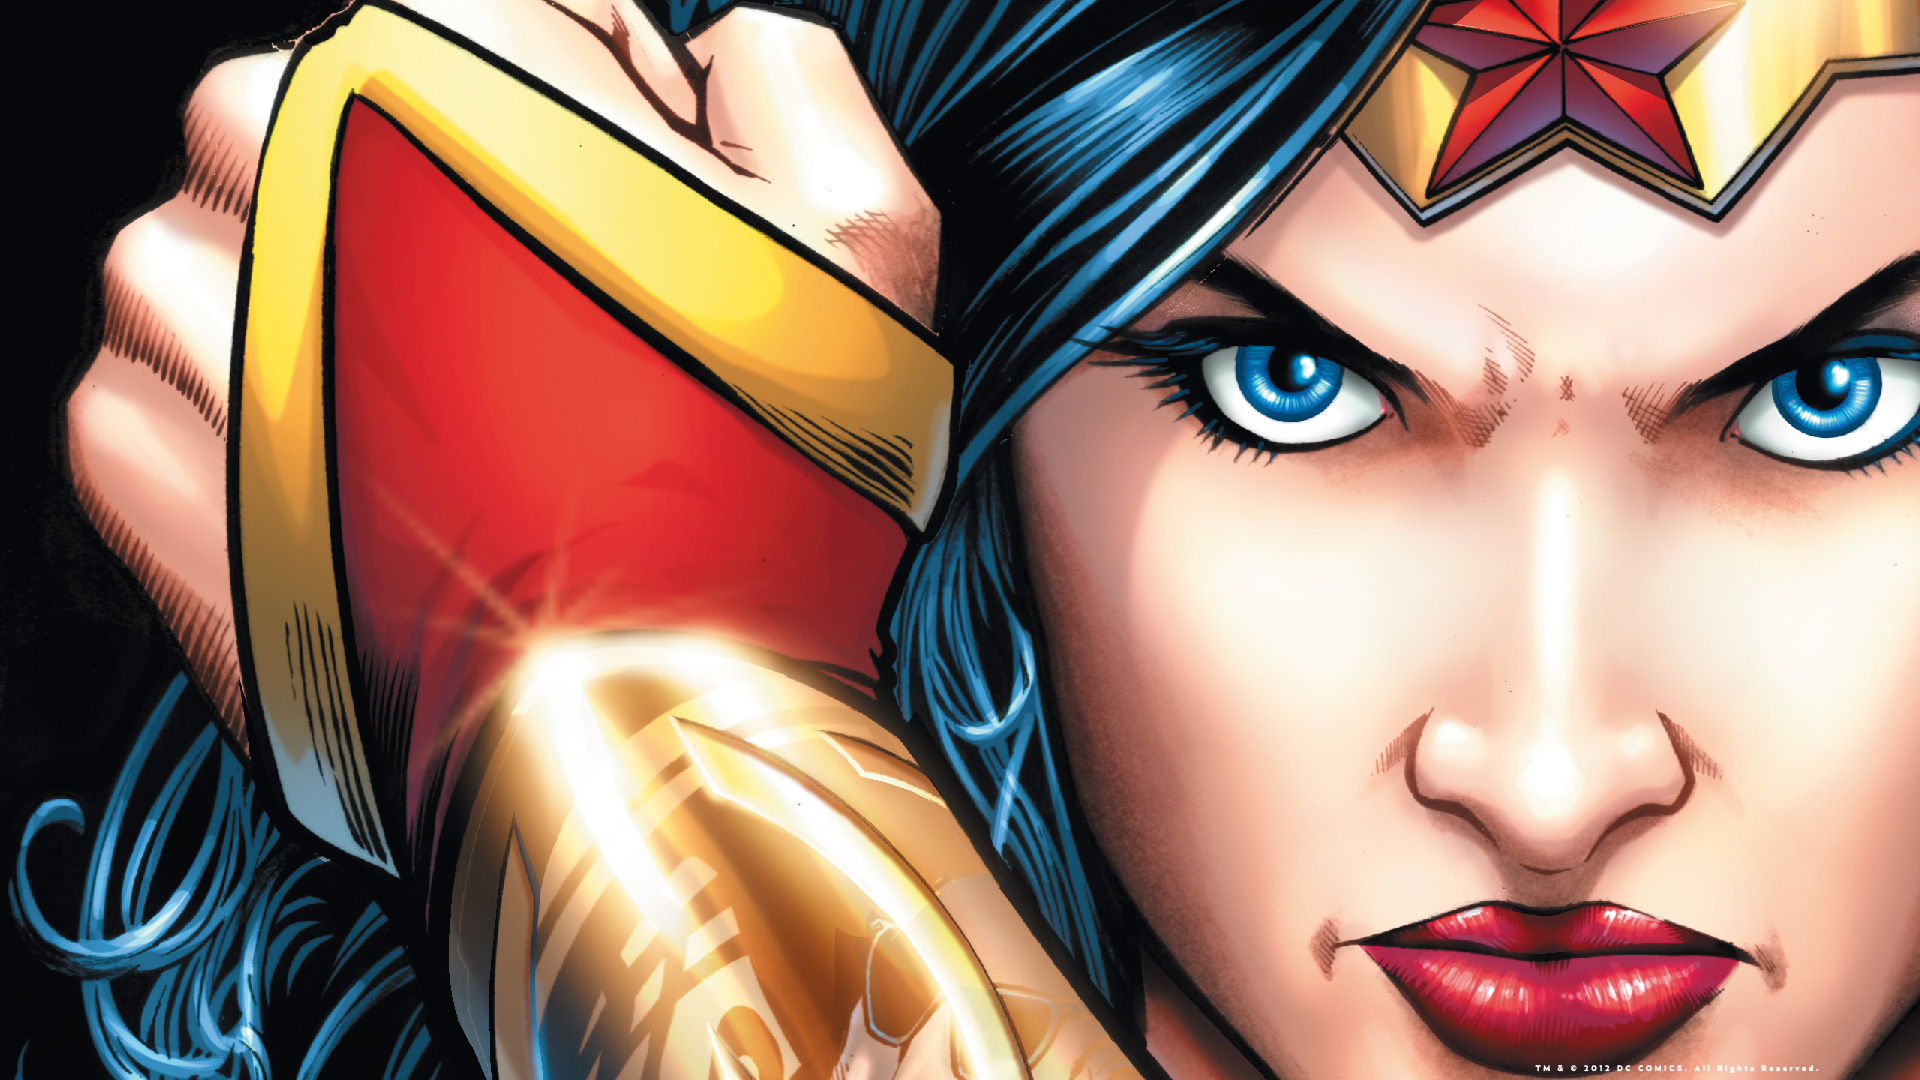 Right click the HD 1920 x 1080 Wonder Woman wallpaper image and choose